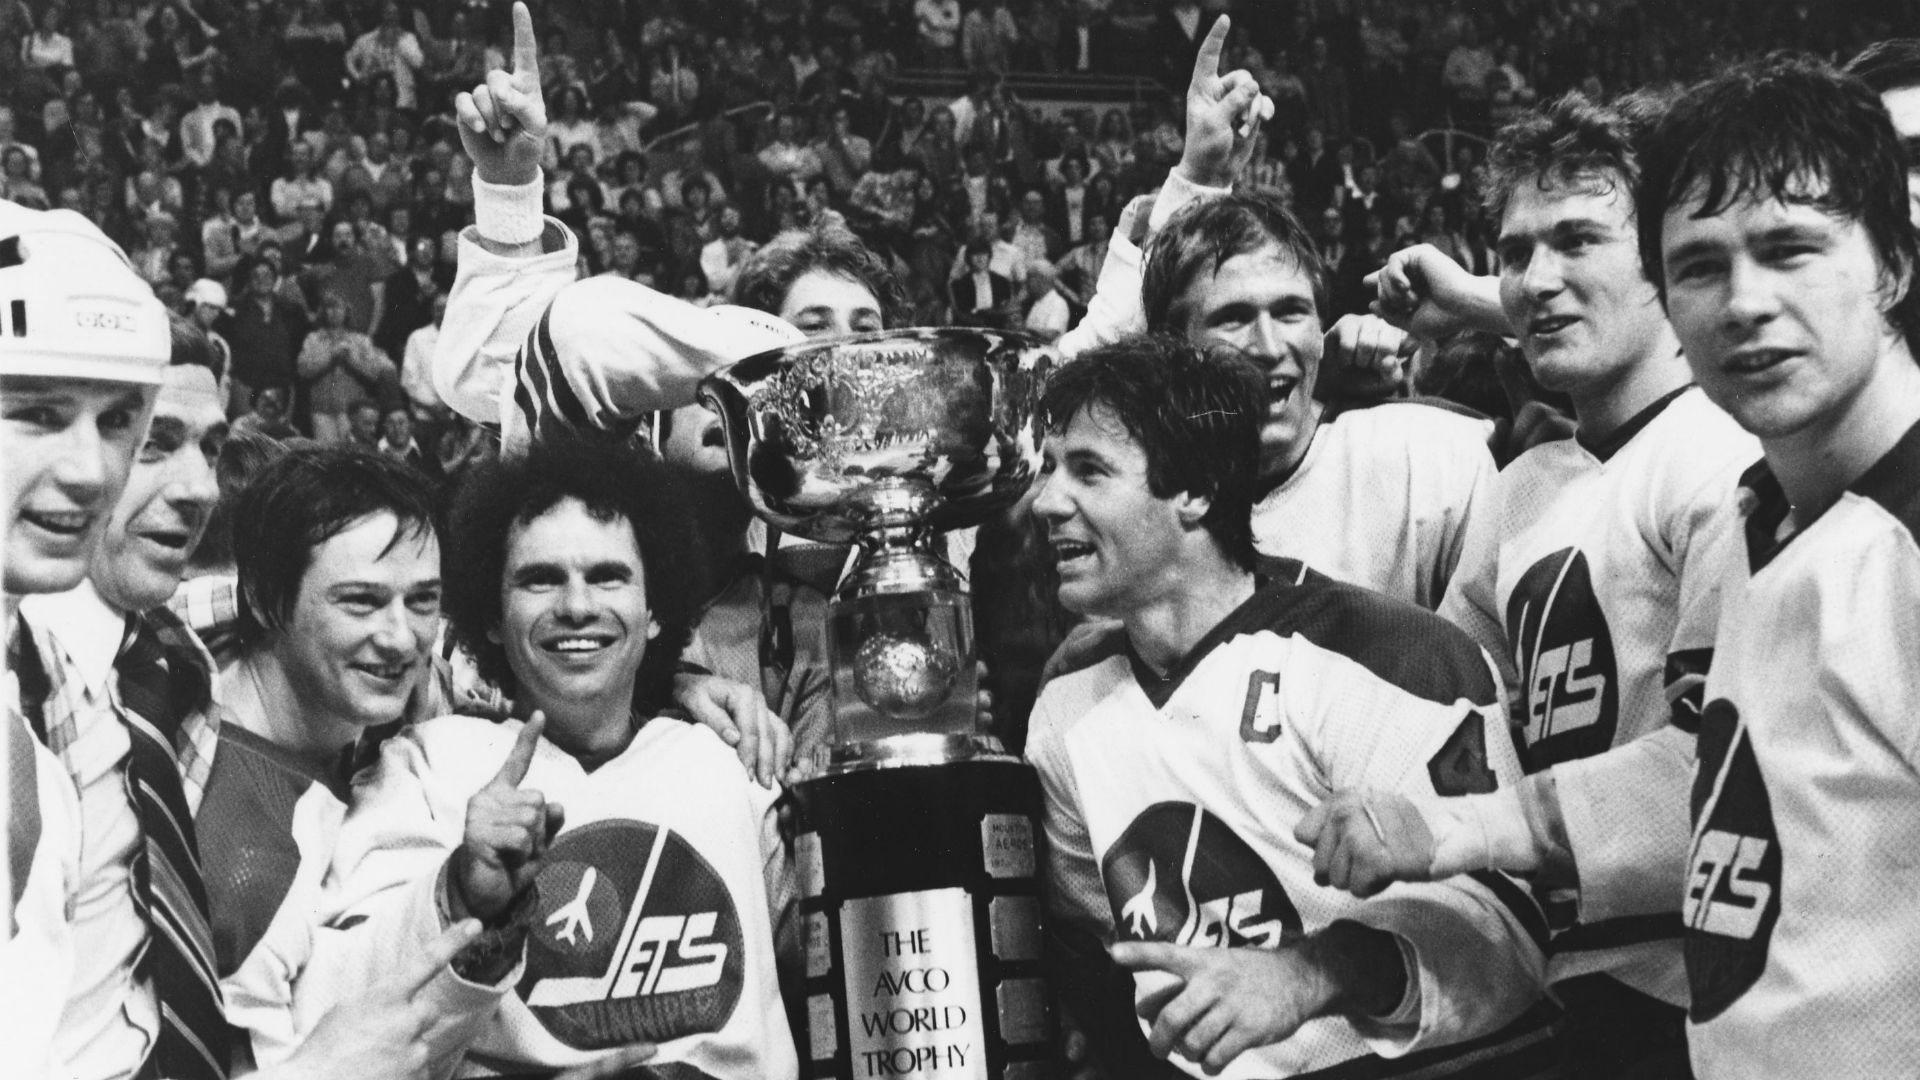 The history and heartbreak behind the Jets-Oilers rivalry - Sportsnet.ca